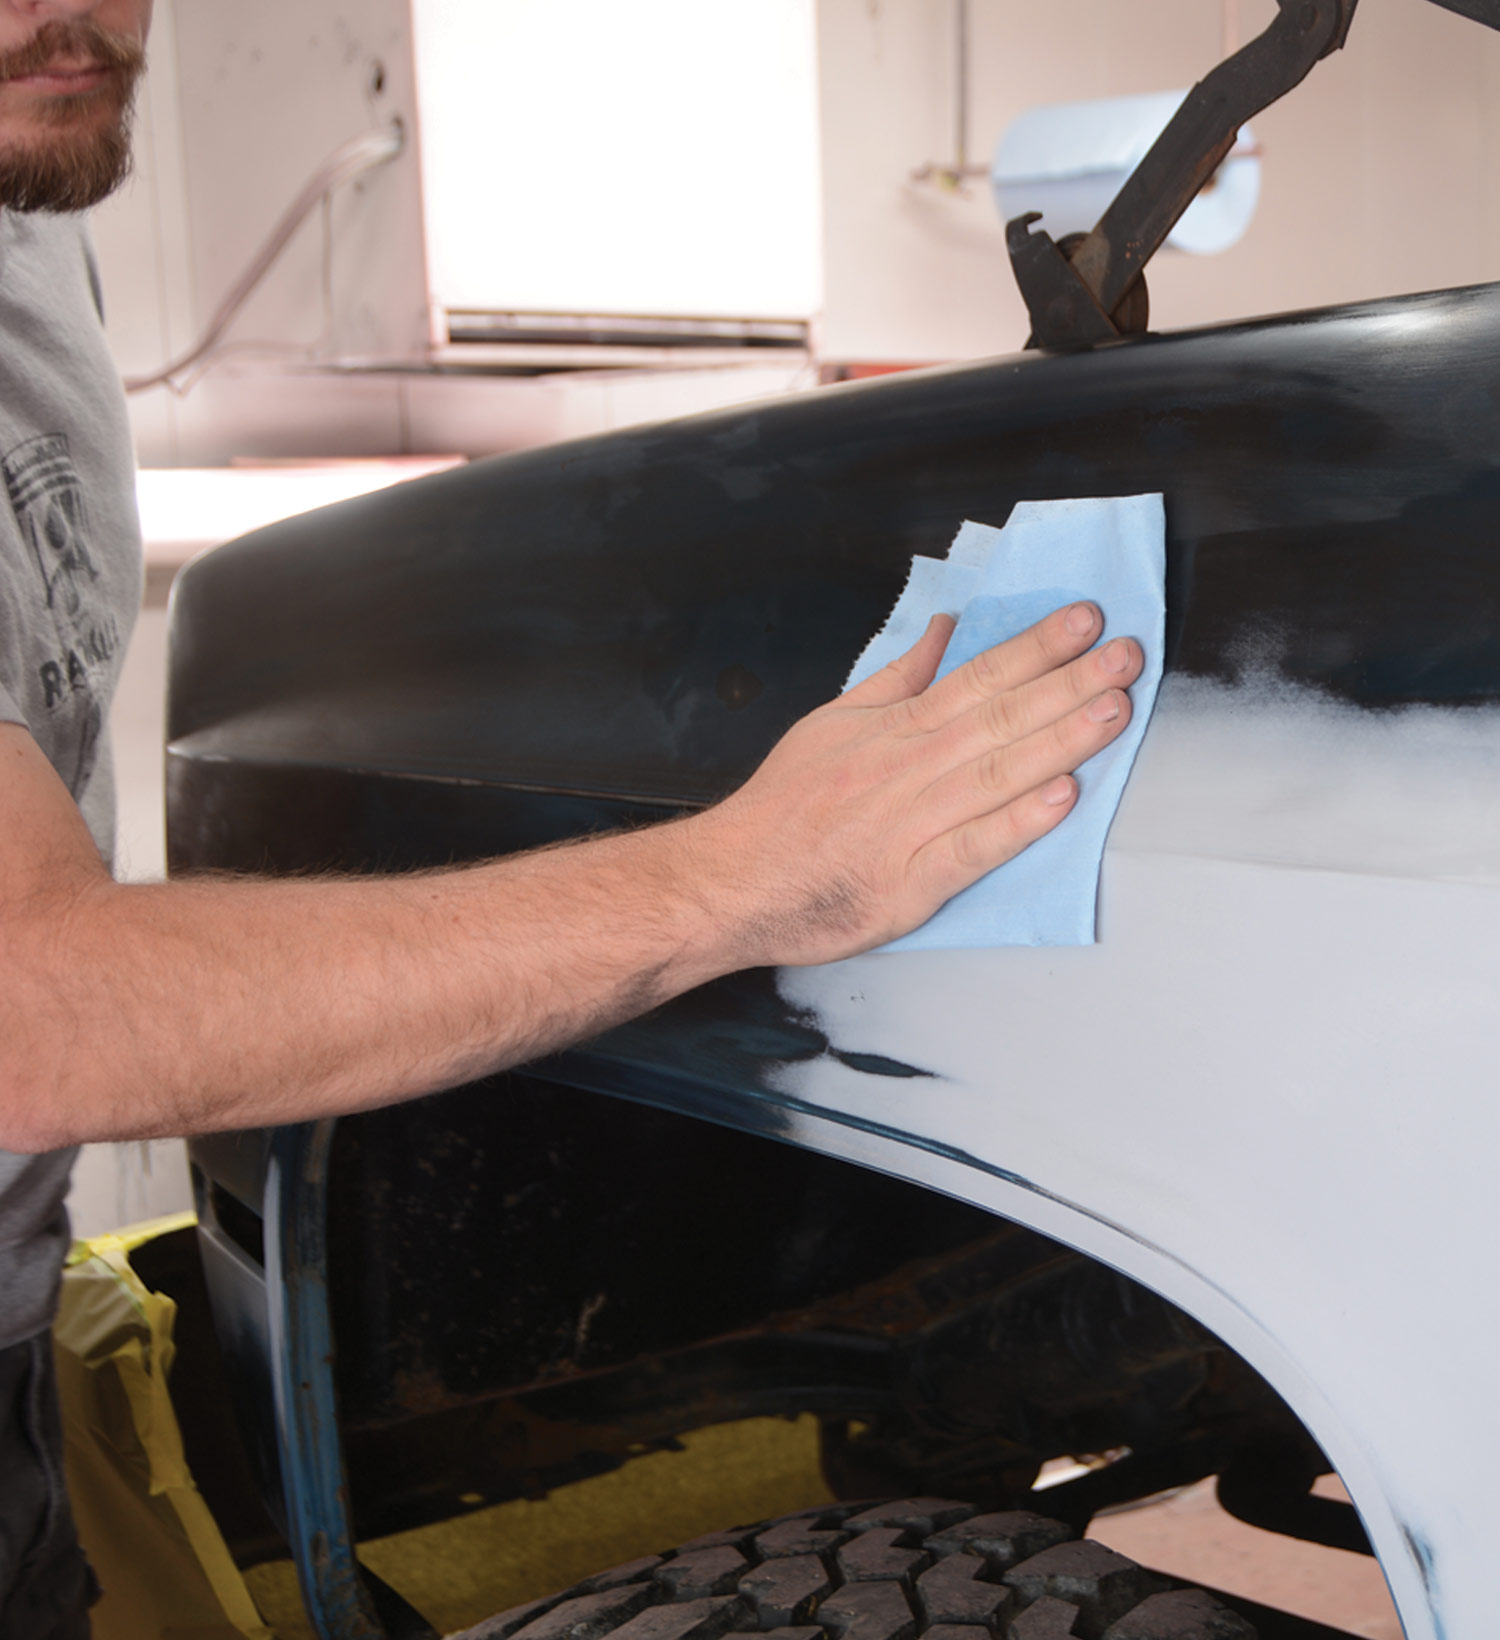 wax and grease remover are used to clean the surface of the car